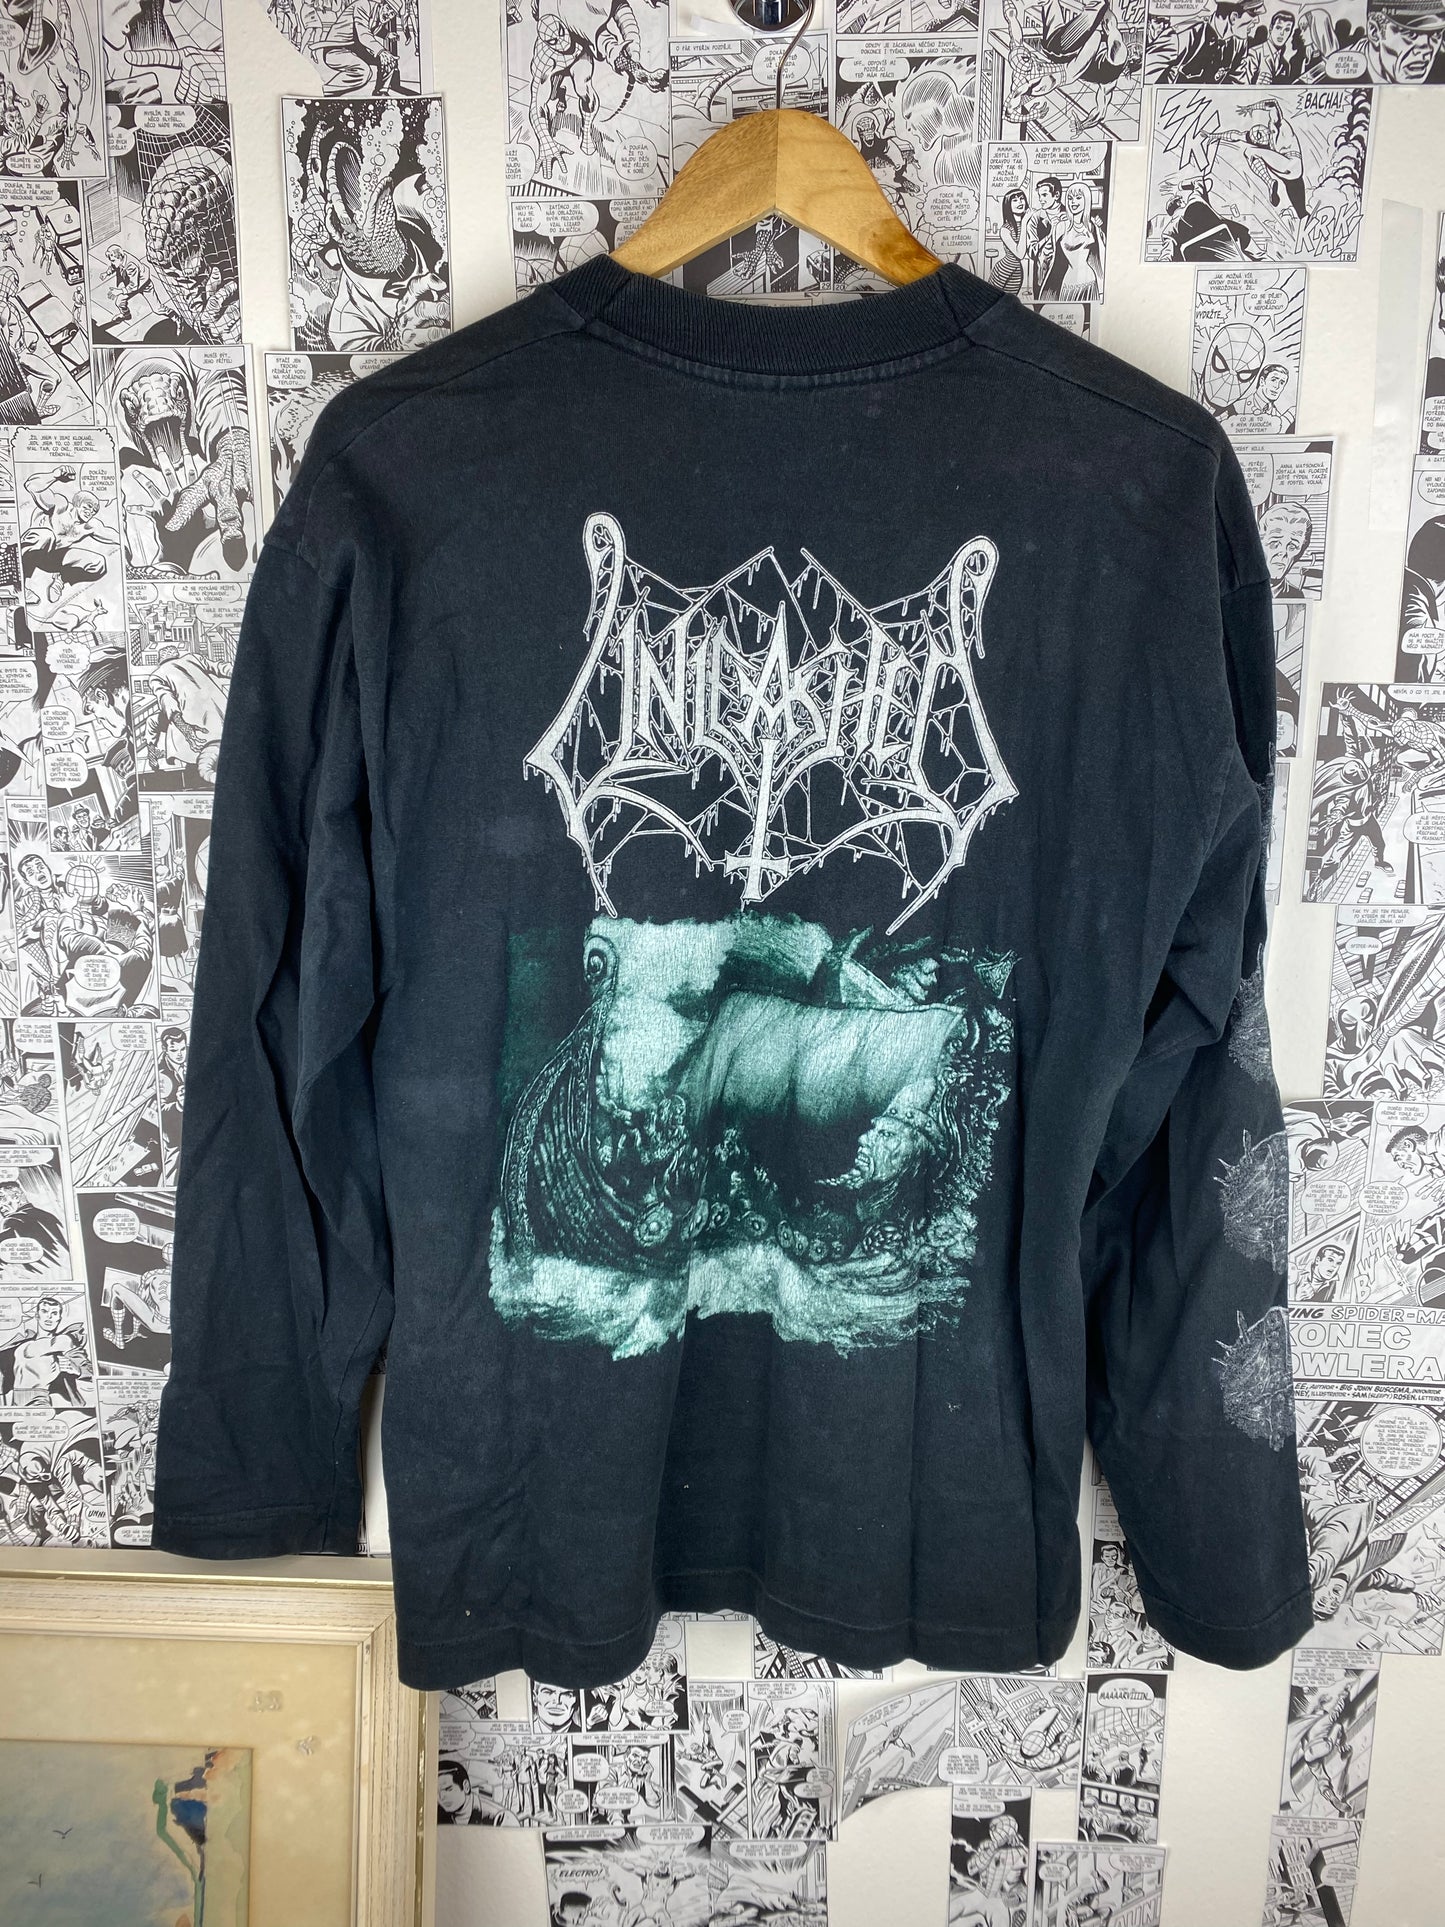 Vintage Unleashed “Across The Open Sea” 1993 Long Sleeve - size L